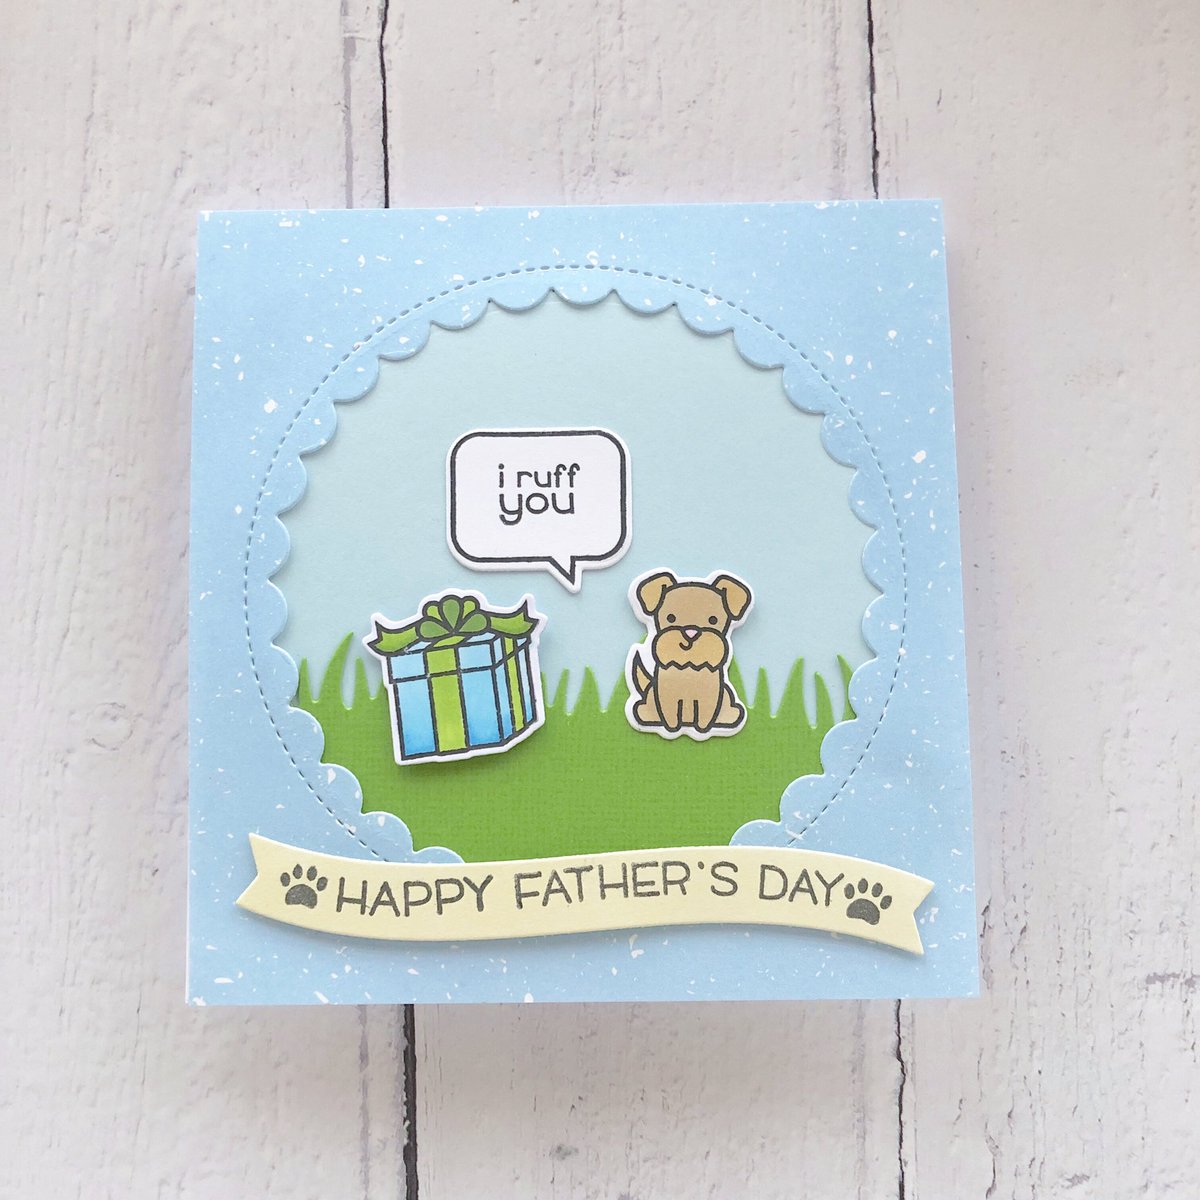 A super simple Father’s Day card for all the dads with fur babies!

#craftwithsophie #handmade #handmadecard #FathersDay2019 #furbabies #dog #fromthedog #lawnfawn